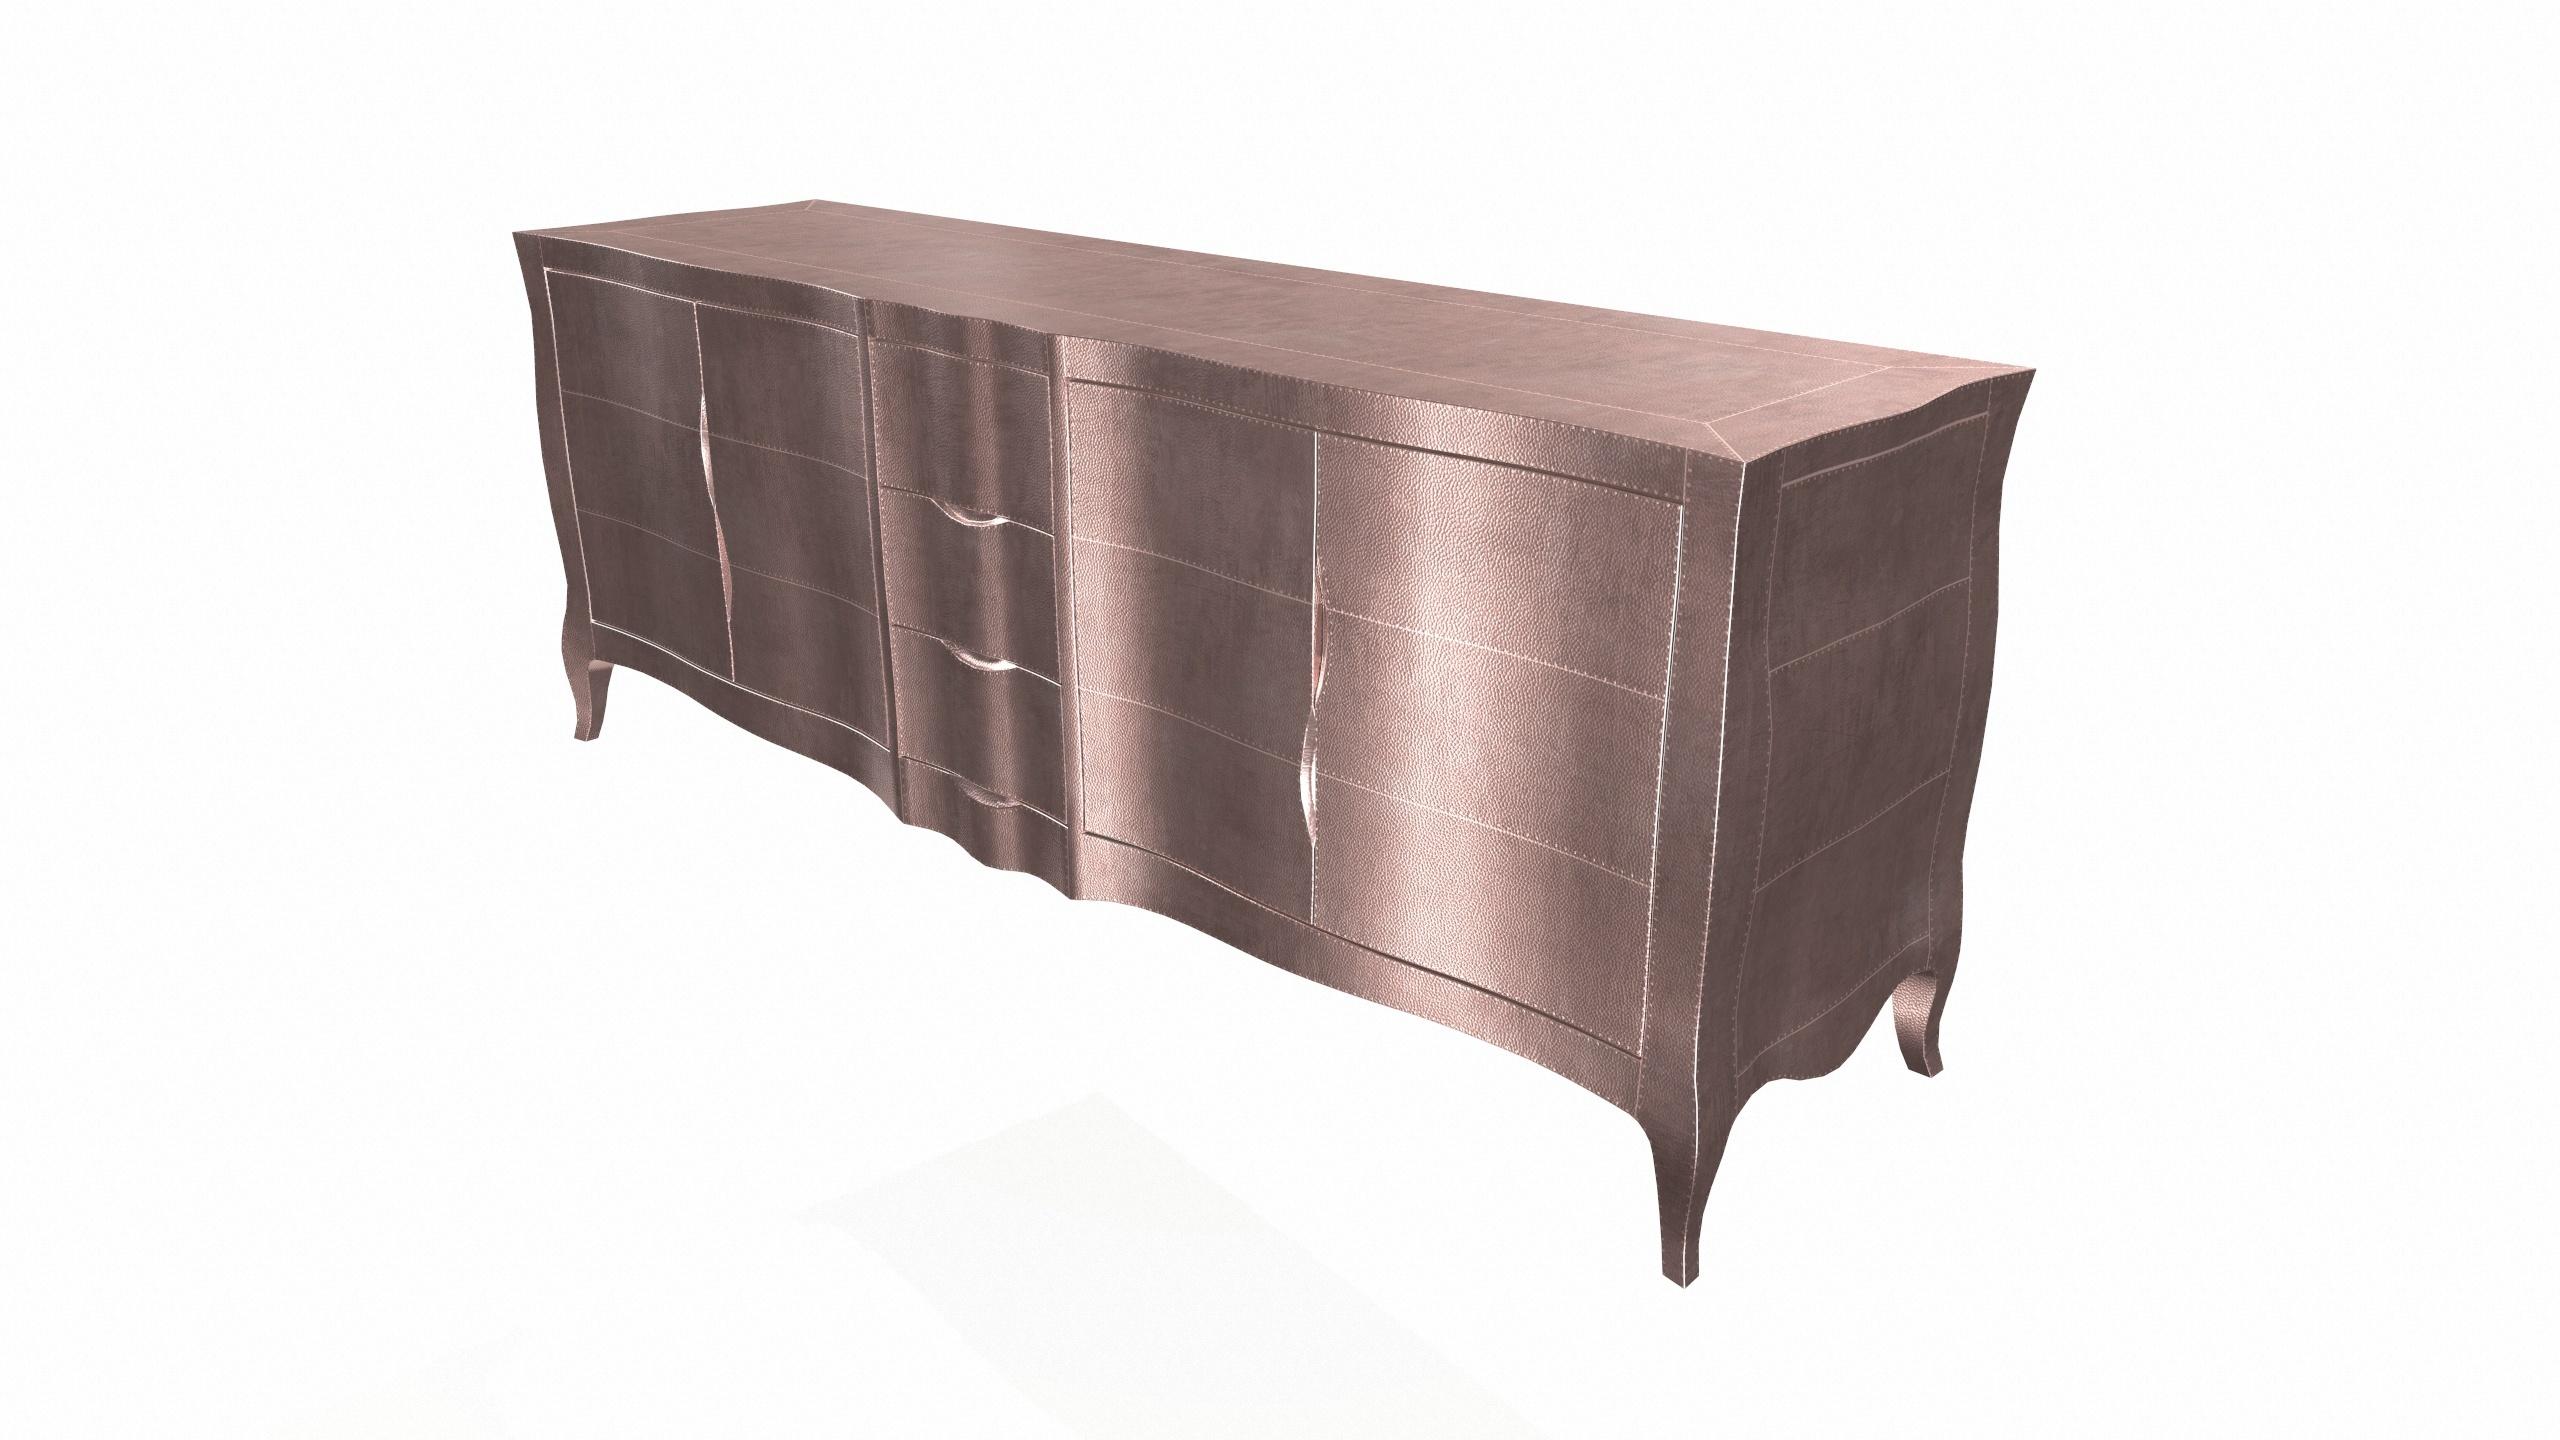 American Louise Credenza Art Deco Sideboards in Mid. Hammered Copper by Paul Mathieu For Sale